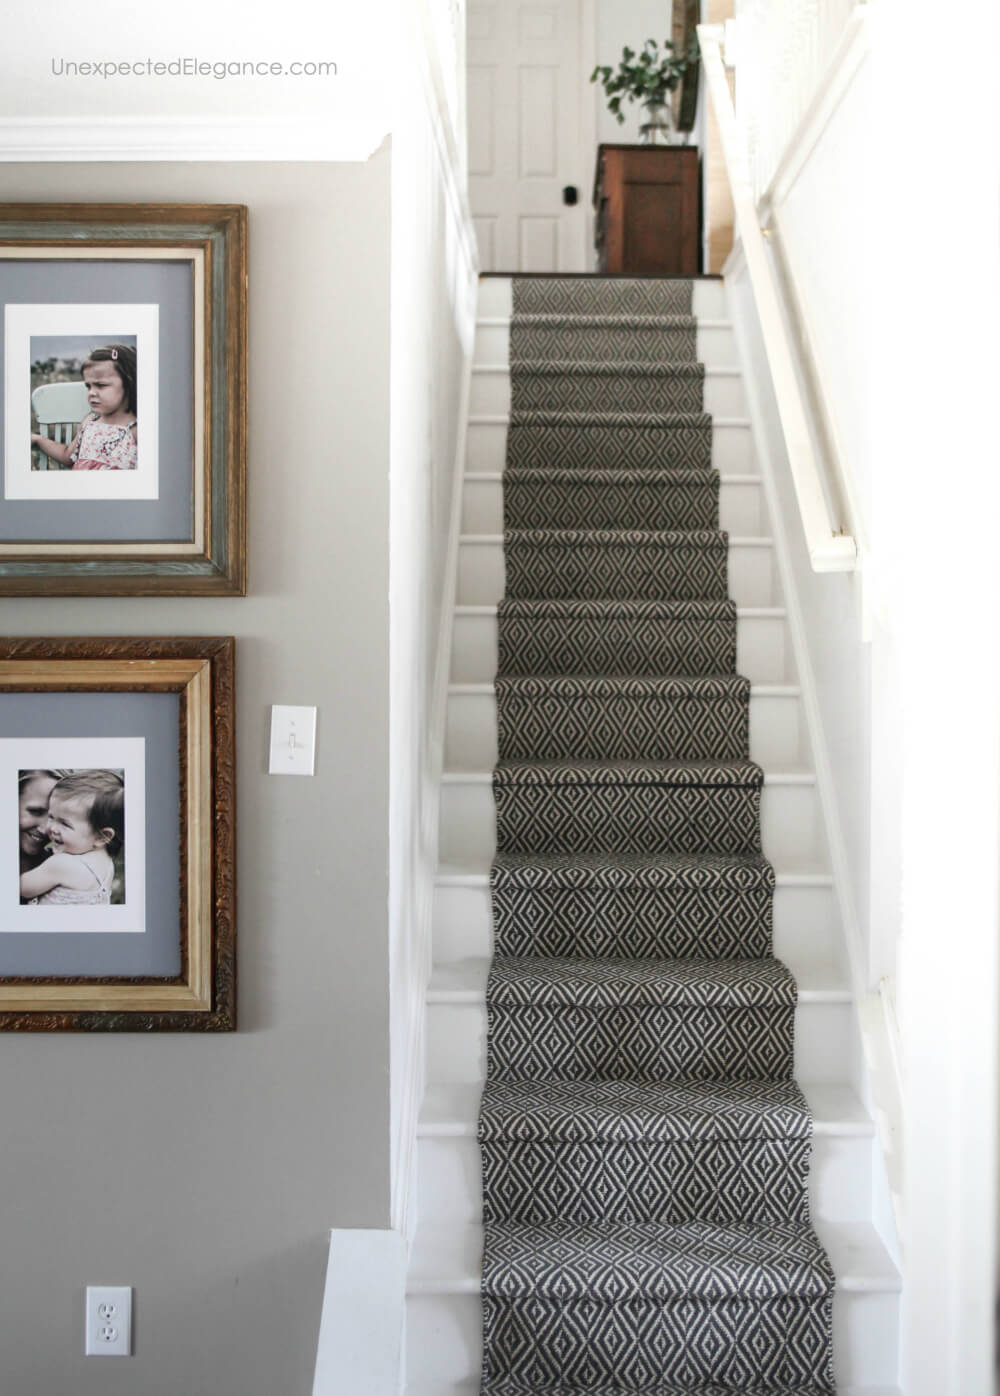 What Do Stairs Look Like Under Carpet?